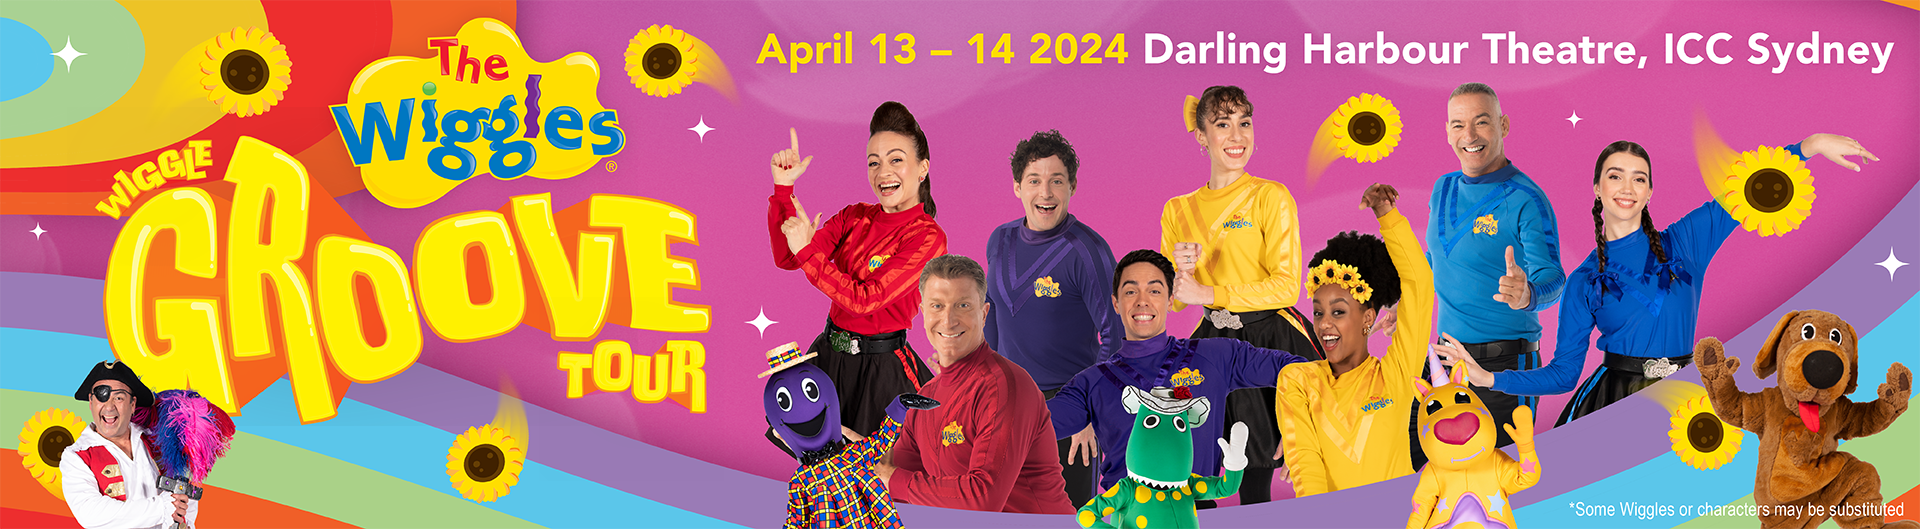 The Wiggles - Wiggle GROOVE is coming to ICC Sydney's Darling Harbour Theatre on Saturday 13 - Sunday 14 April 2024.